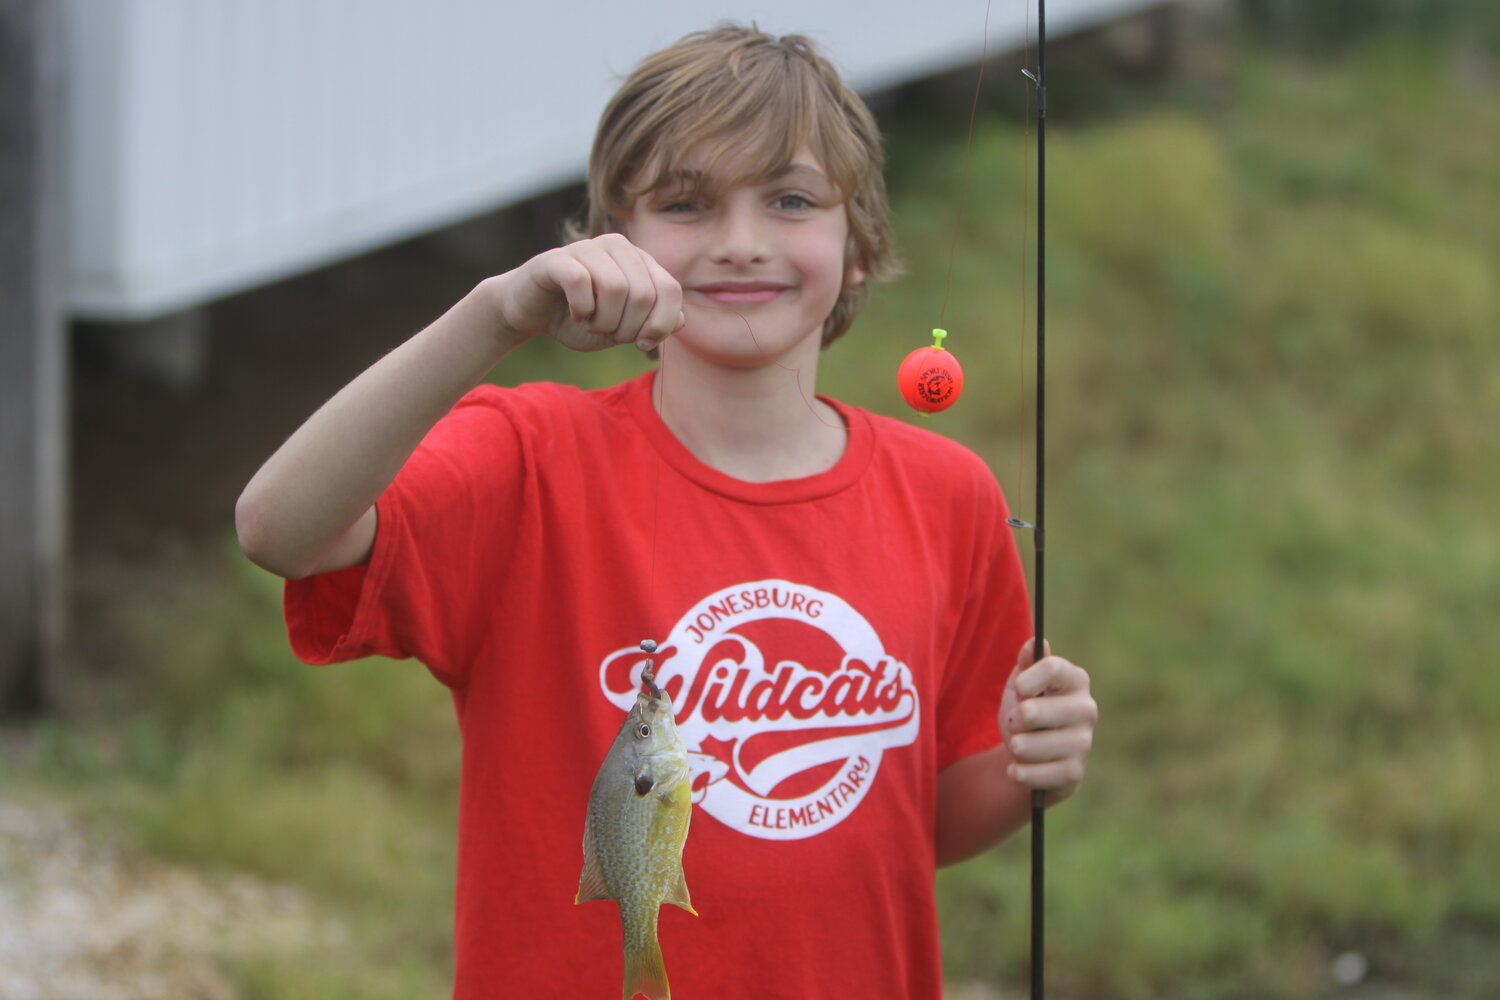 Dylan Finke of Jonesburg Elementary poses with his fish he caught at the Stevens Farm Tour on May 16.